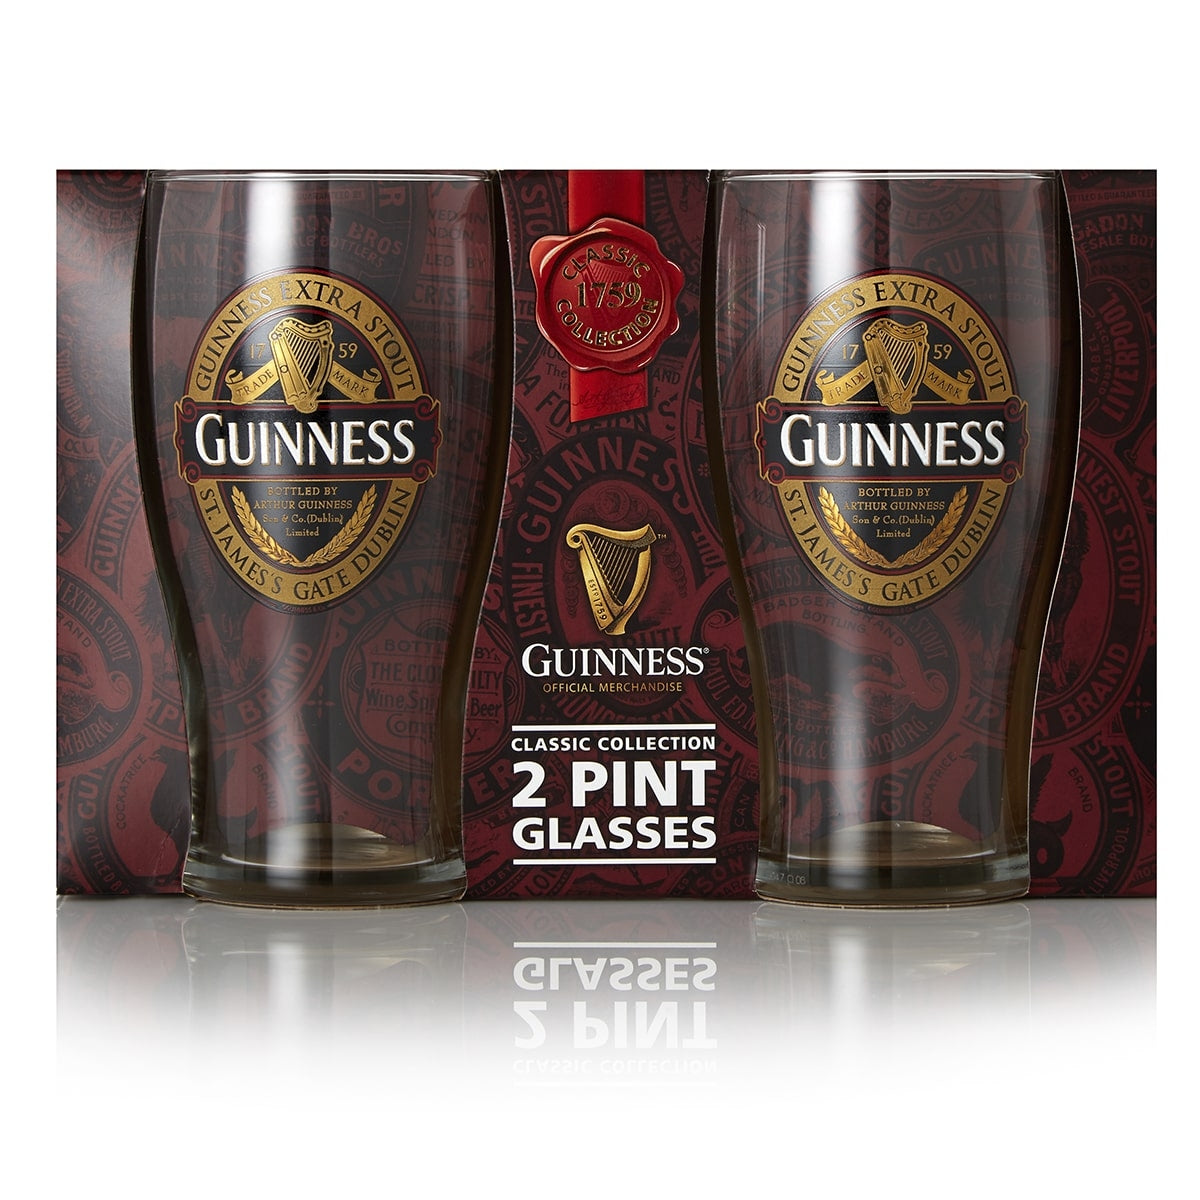 Two Guinness Classic Collection Pint Glasses in a package by Guinness UK.